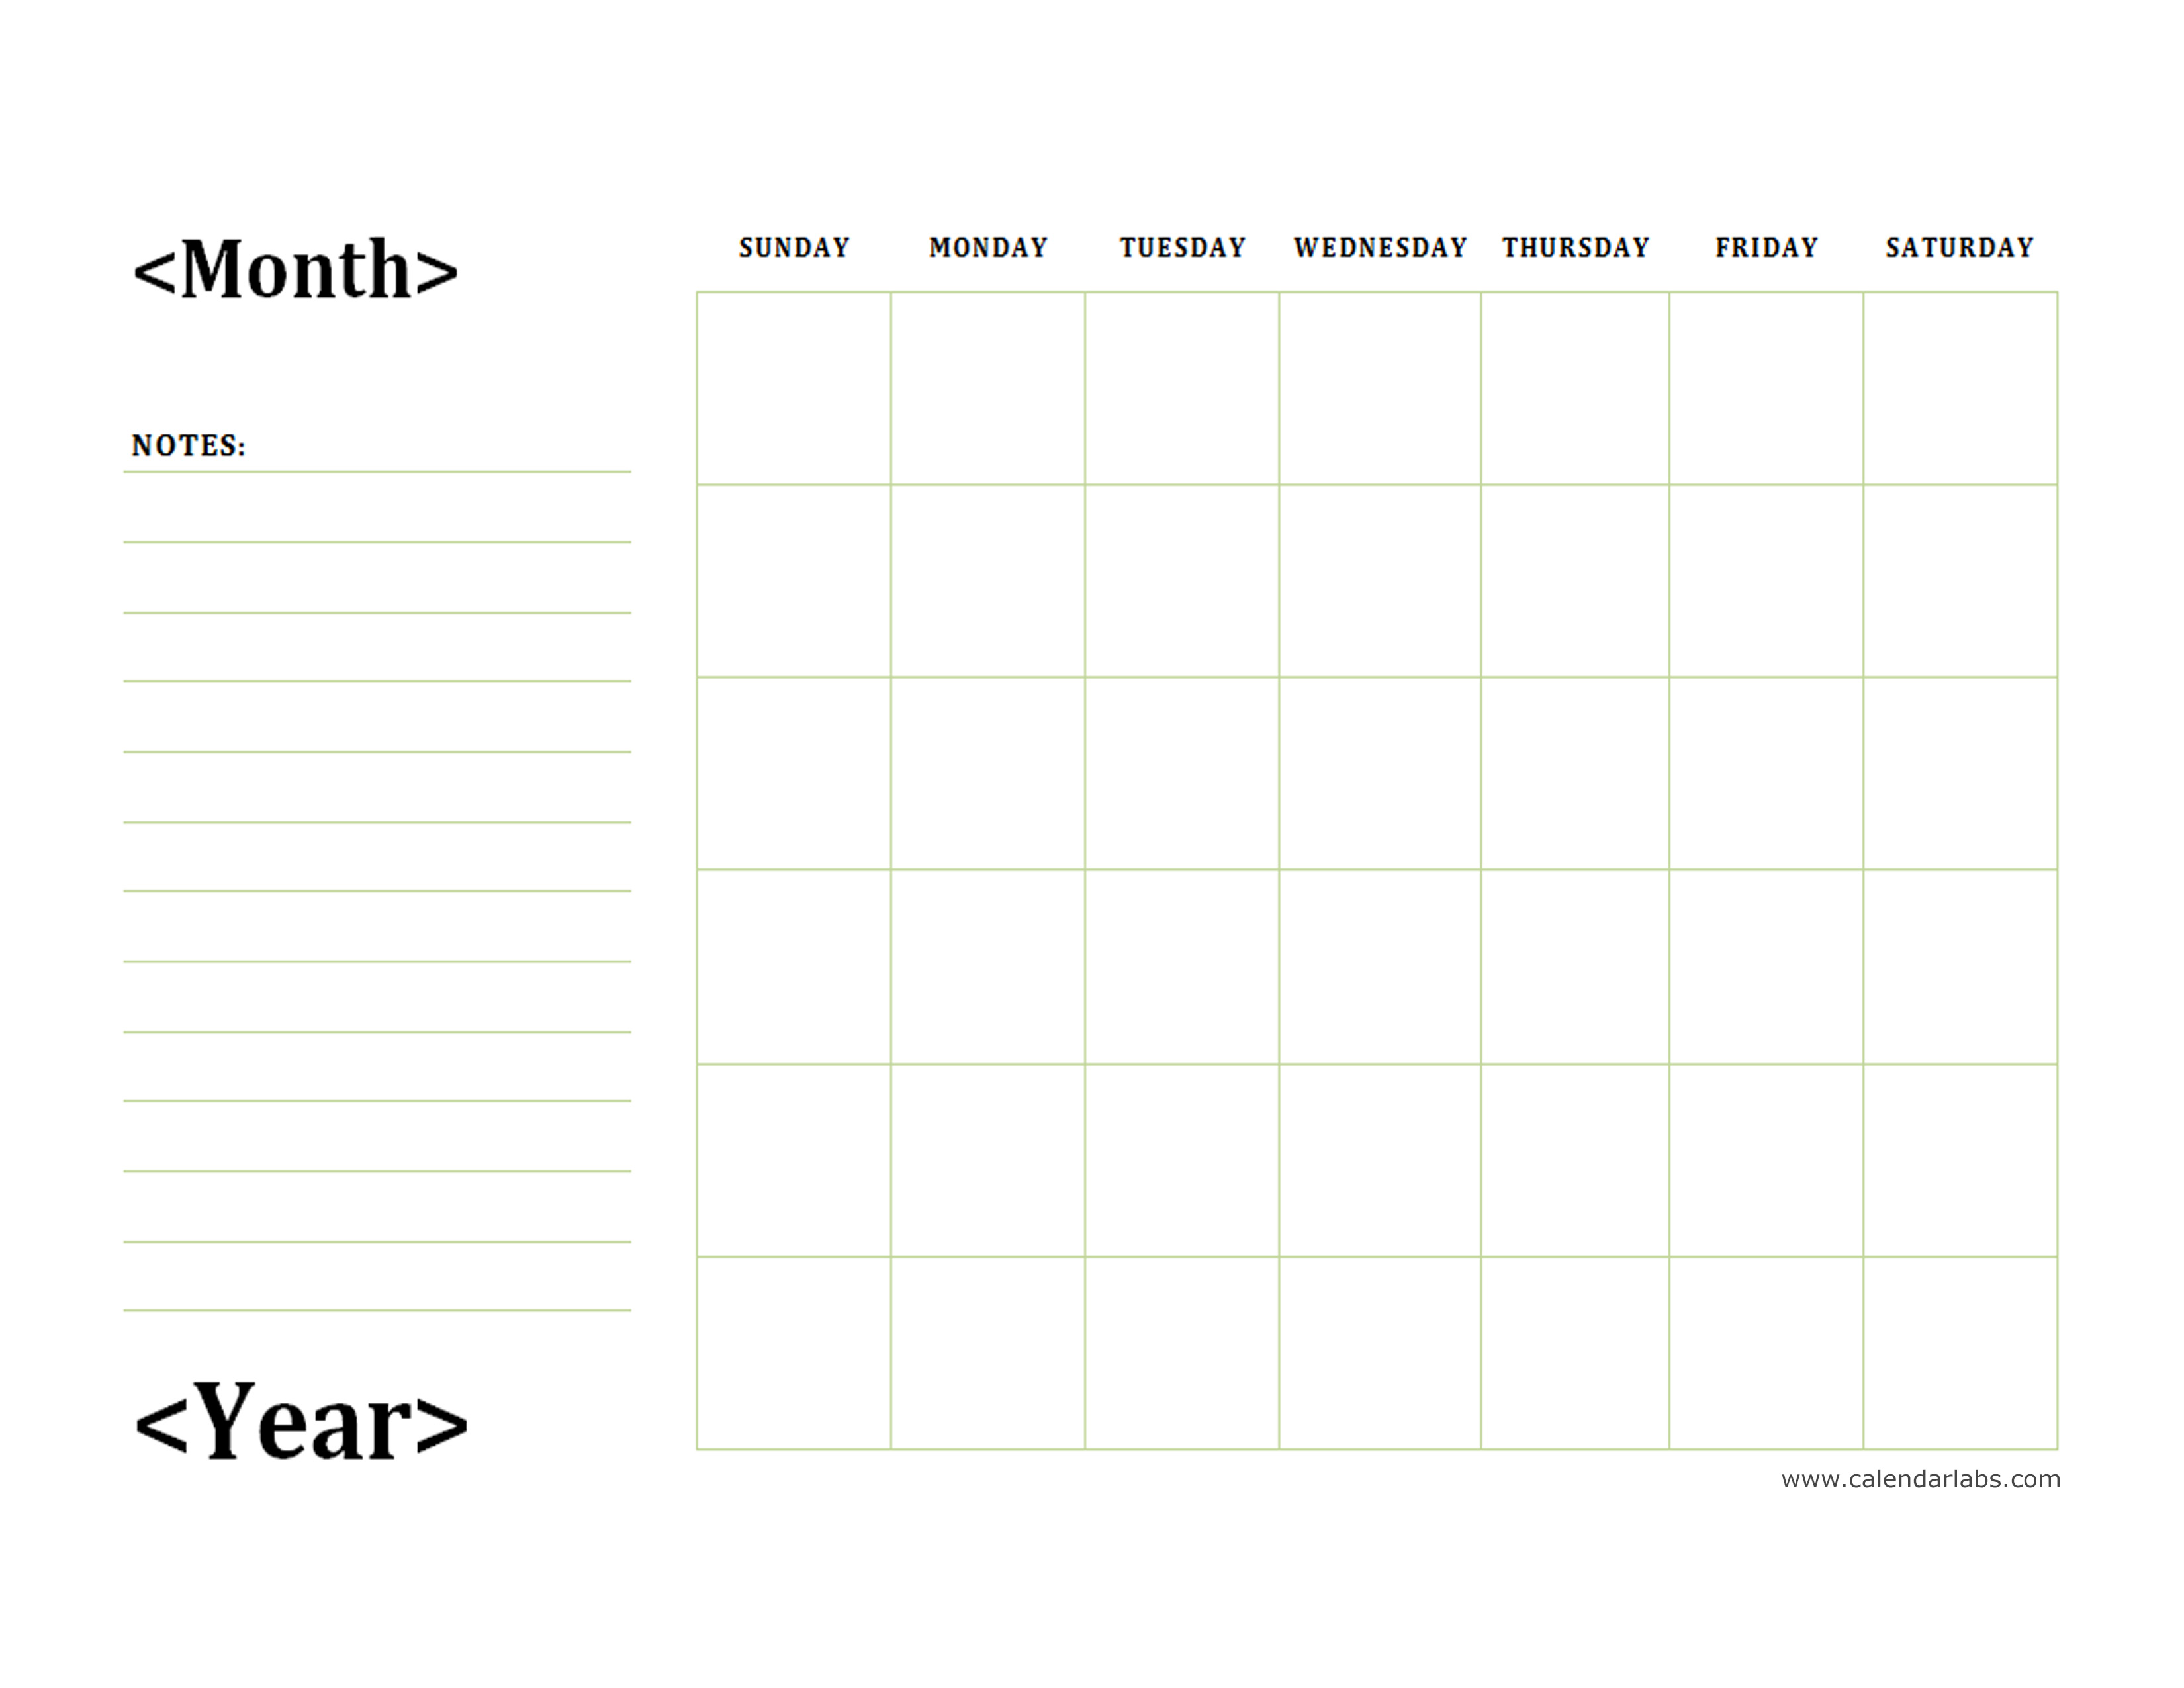 Printable Blank Monthly Calendar With Notes Free By 123freevectors On Gambaran